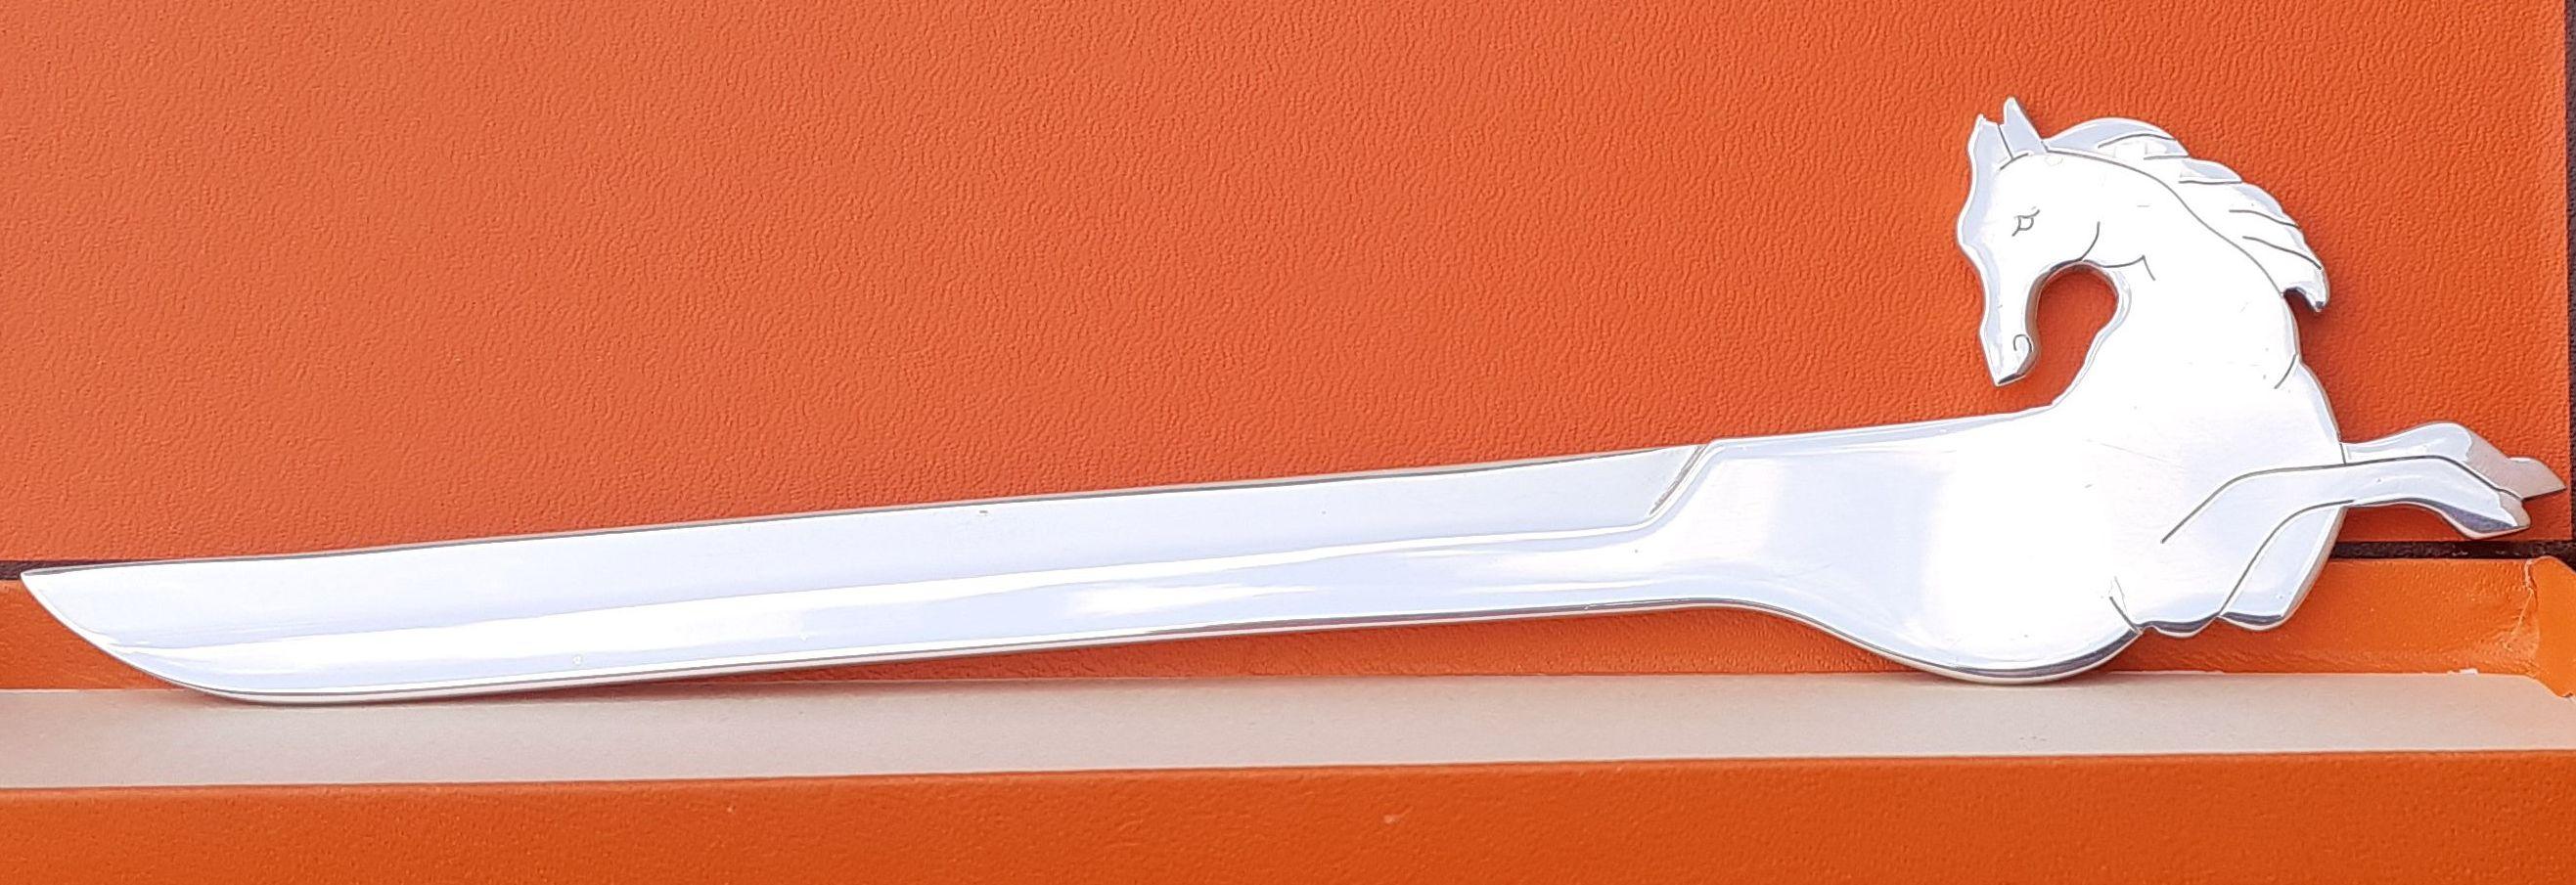 Exceptional Authentic Hermès Letter Opener

Absolutely stunning, a rare collector item

Horse Shaped

Made in France

Vintage Item, made by Ravienet d'Enfert for Hermès

Made of silver-tone metal

